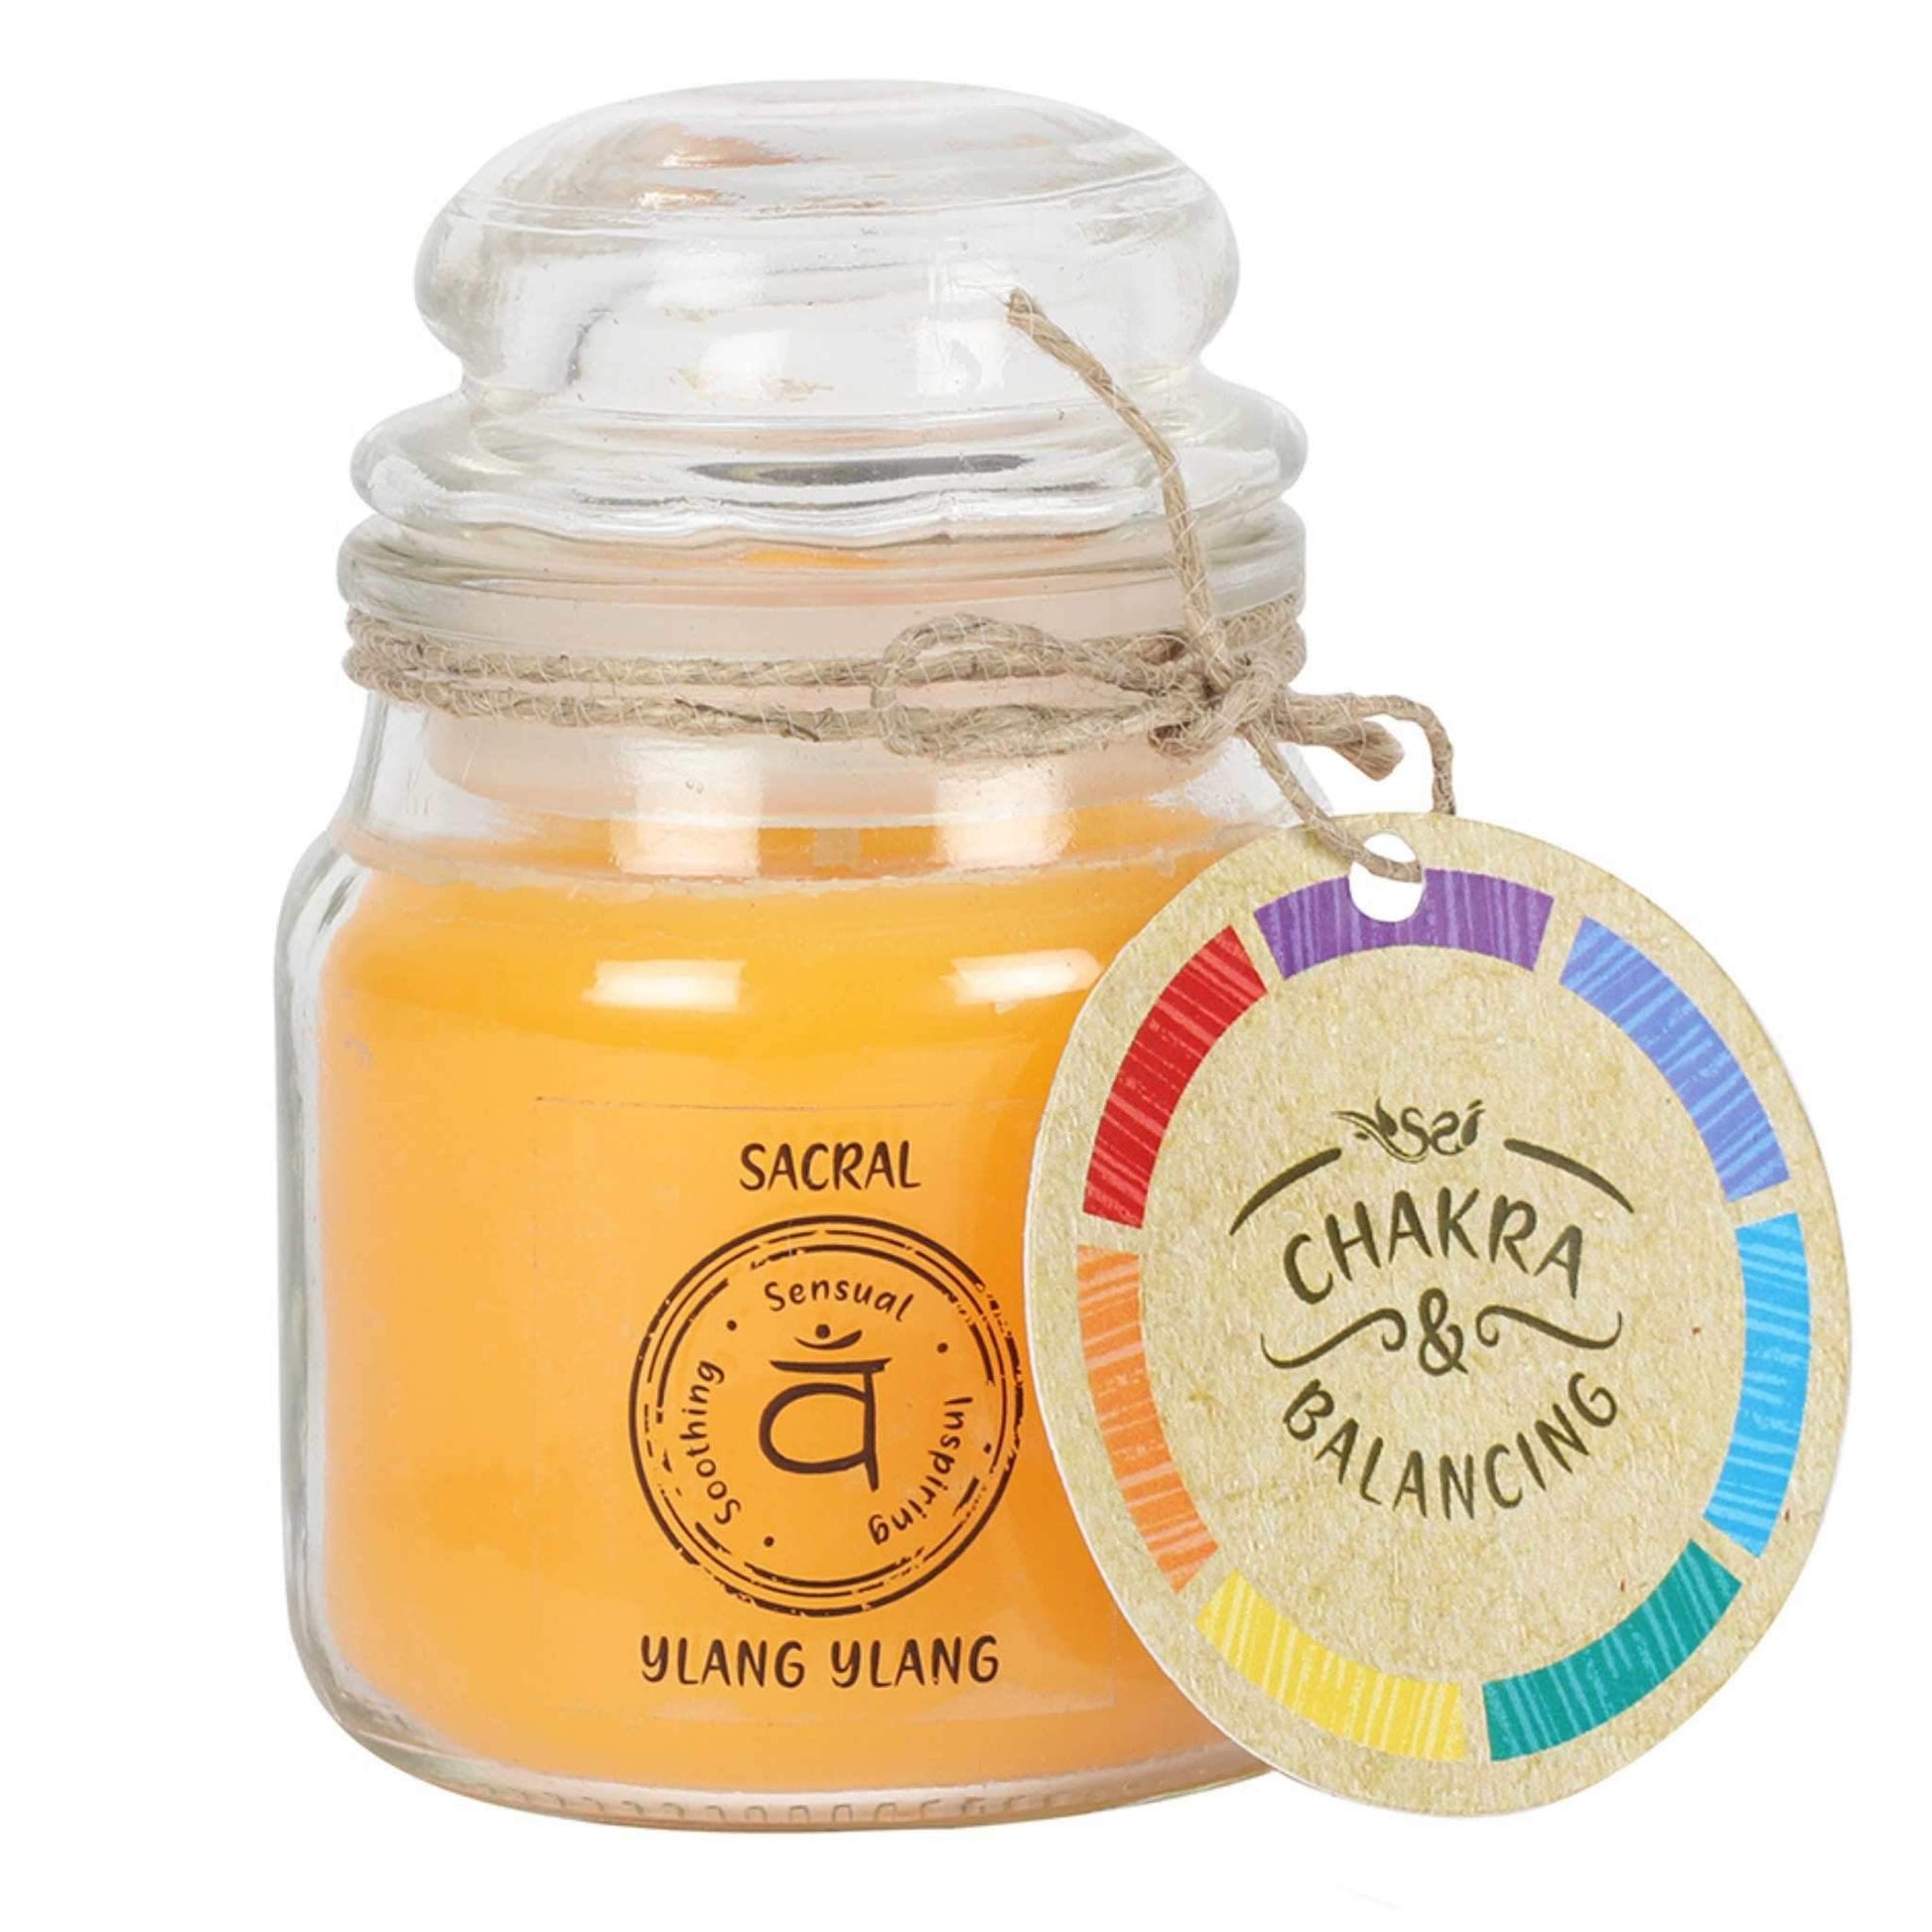 Balancing Chakra Candle in a min glass jar with stopper. Tied with a label that says Chakra Balancing. Candle is orangey yellow with a label on the jar that says Sacral - Ylang Ylang